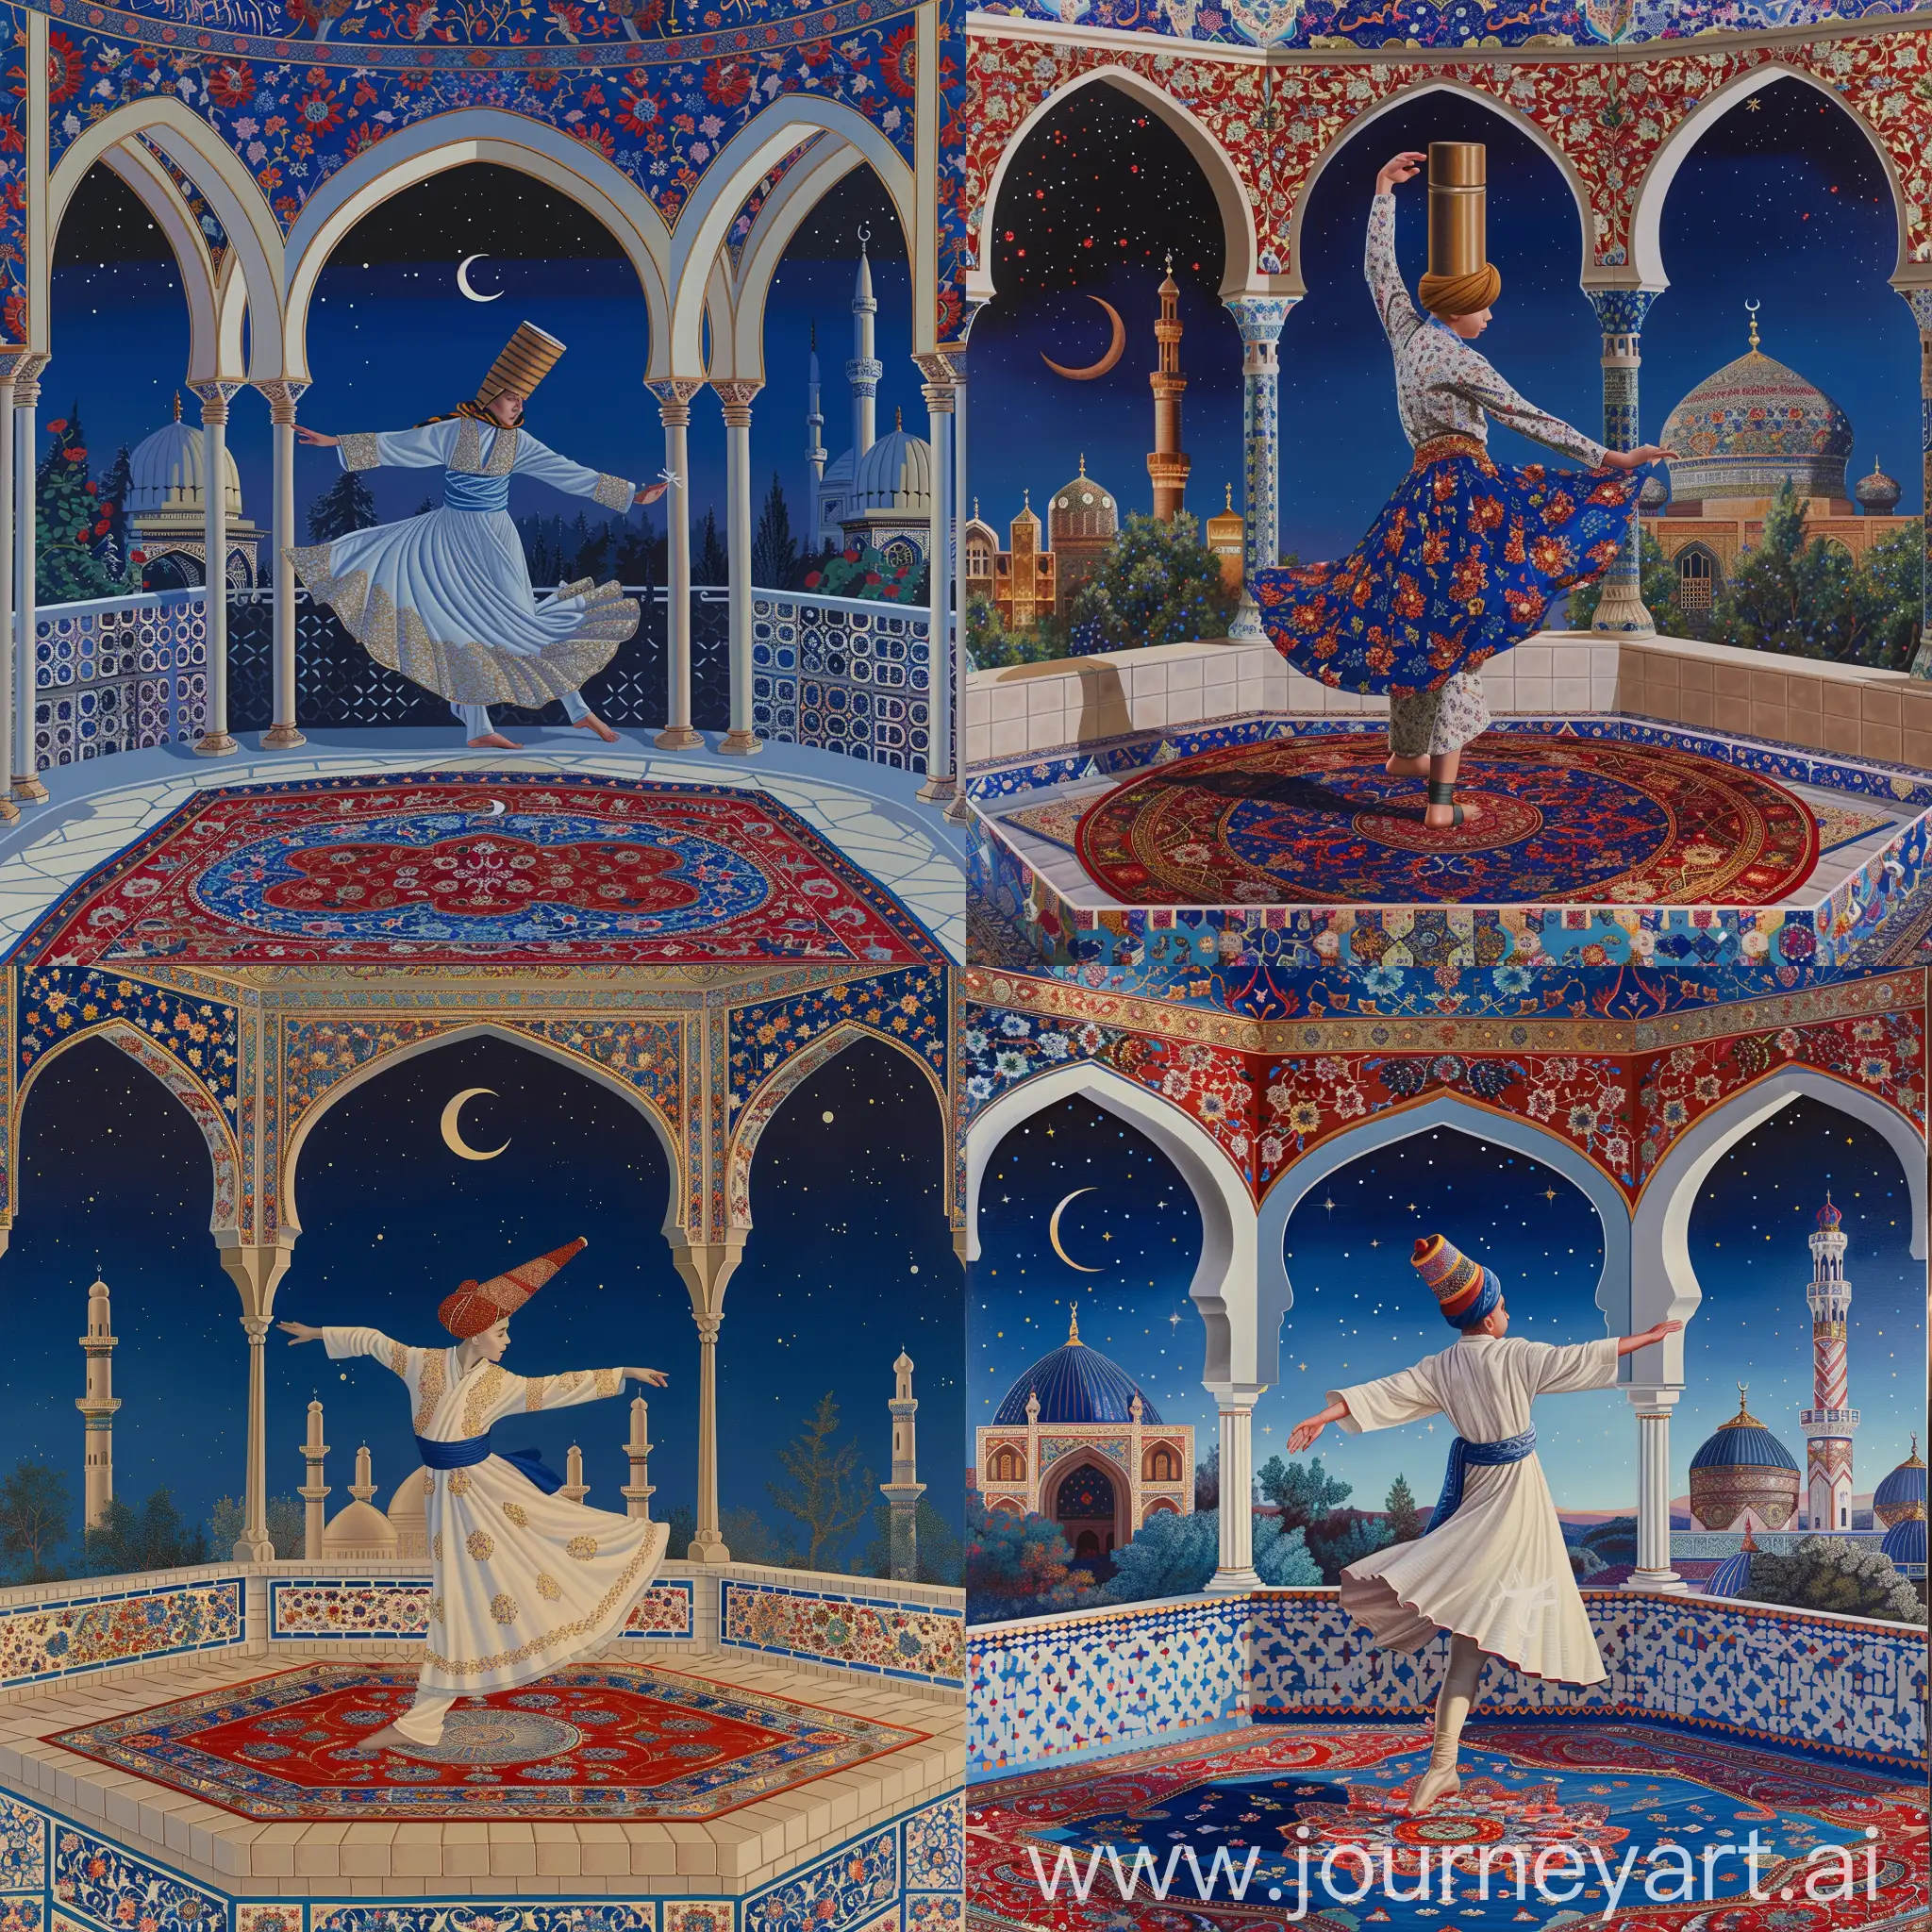 A young British dervish wearing cylindrical fez cap performing sufi whirling sema dance on a persian carpet, inside an octagonal balcony having three arches decorated with red blue gold persian floral motifs, serene night sky with a crescent, view of Persian tiled mosque, White blue red golden composition --sref <https://cdn.discordapp.com/attachments/1213041174428782623/1223222044104069191/IMG_20240326_220808.png?ex=665c4dcd&is=665afc4d&hm=6bf196b26583990d01392b5caa7275c6a6890faeaf5efc85434e57eda5e43ae3&> --v 6 --sw 999 --style raw --q 1 --s 999 --ar 2:3